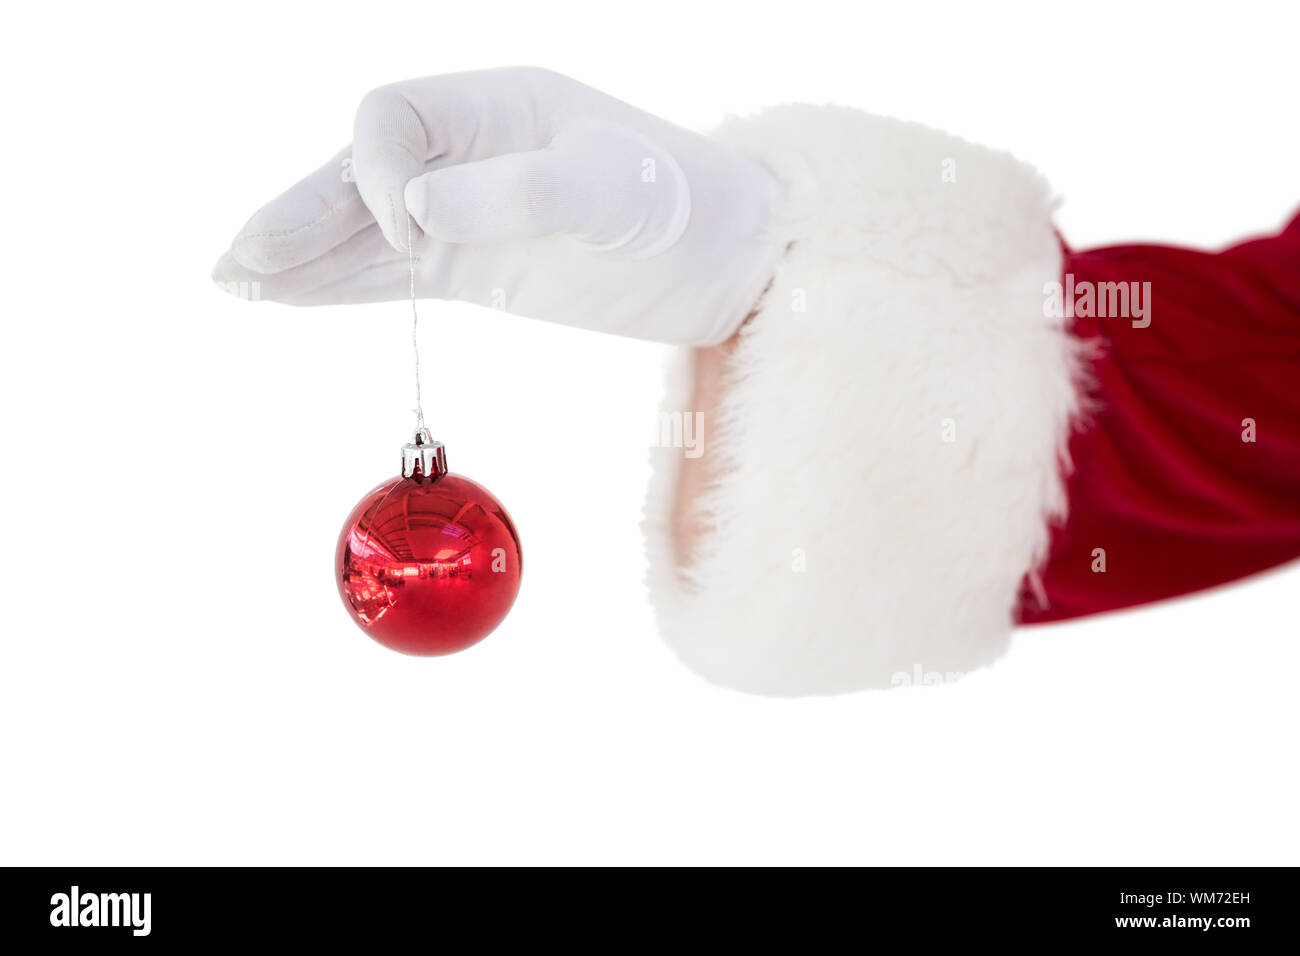 Santa claus holding red bauble on white background Stock Photo